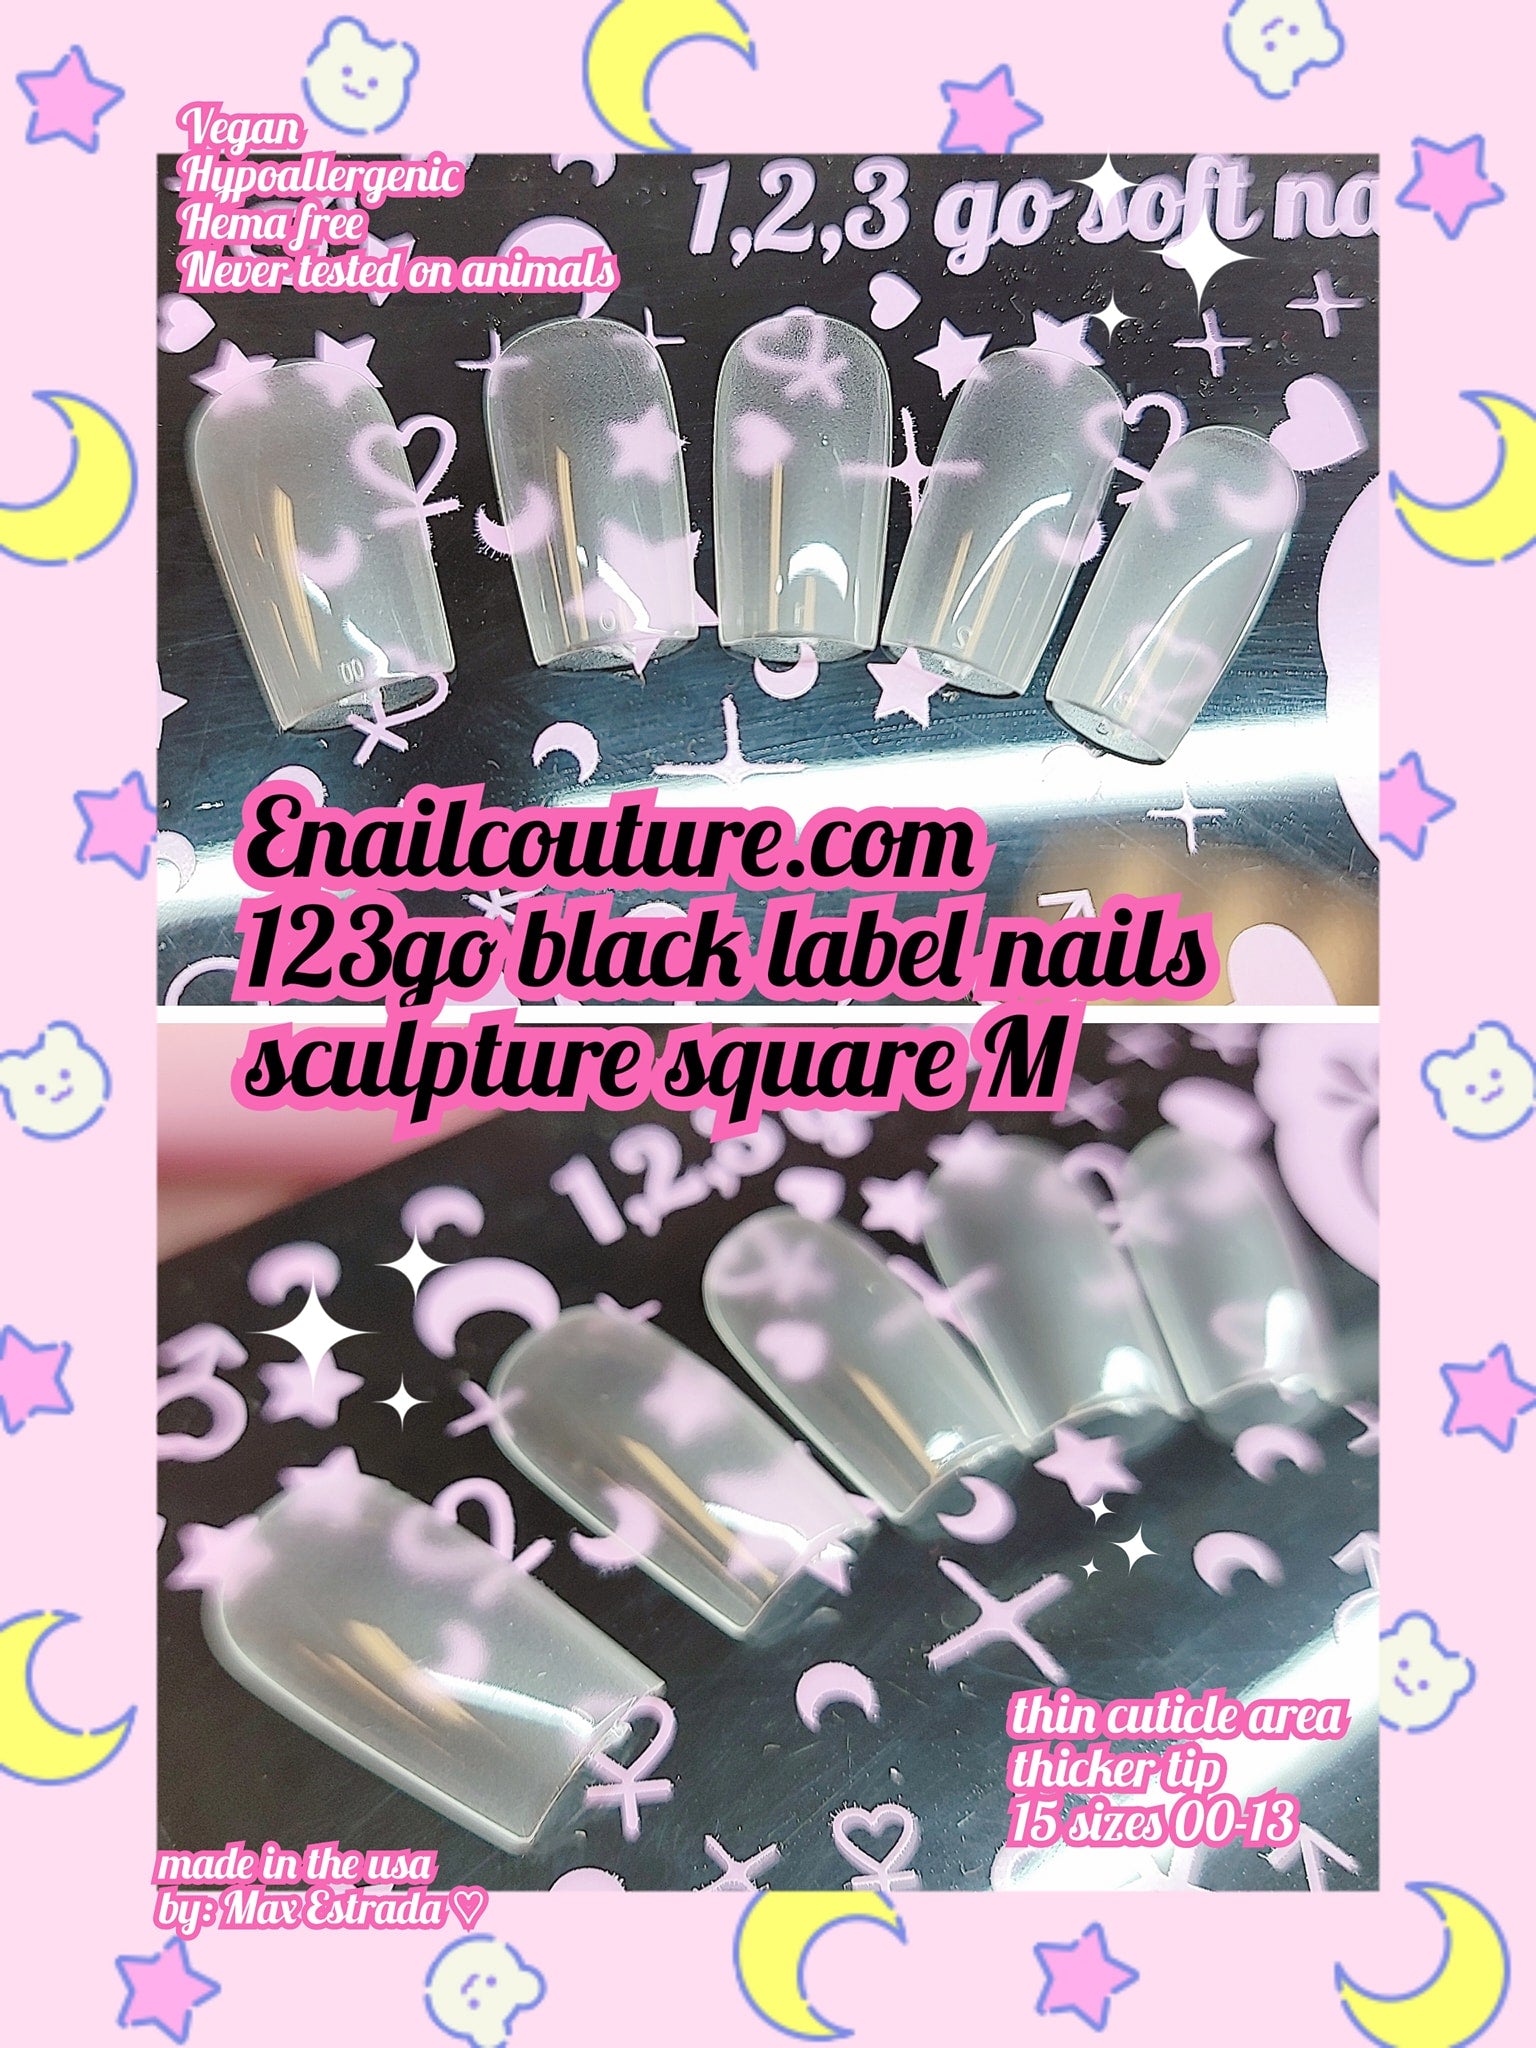 123go Black Label Nails Sculpture Square M (Soft Gel Nail Tips- Clear Cover Full Nail Extensions - Pre-shaped Acrylic False Gelly Nail Tips 15 Sizes for DIY Salon Nail Extensions)